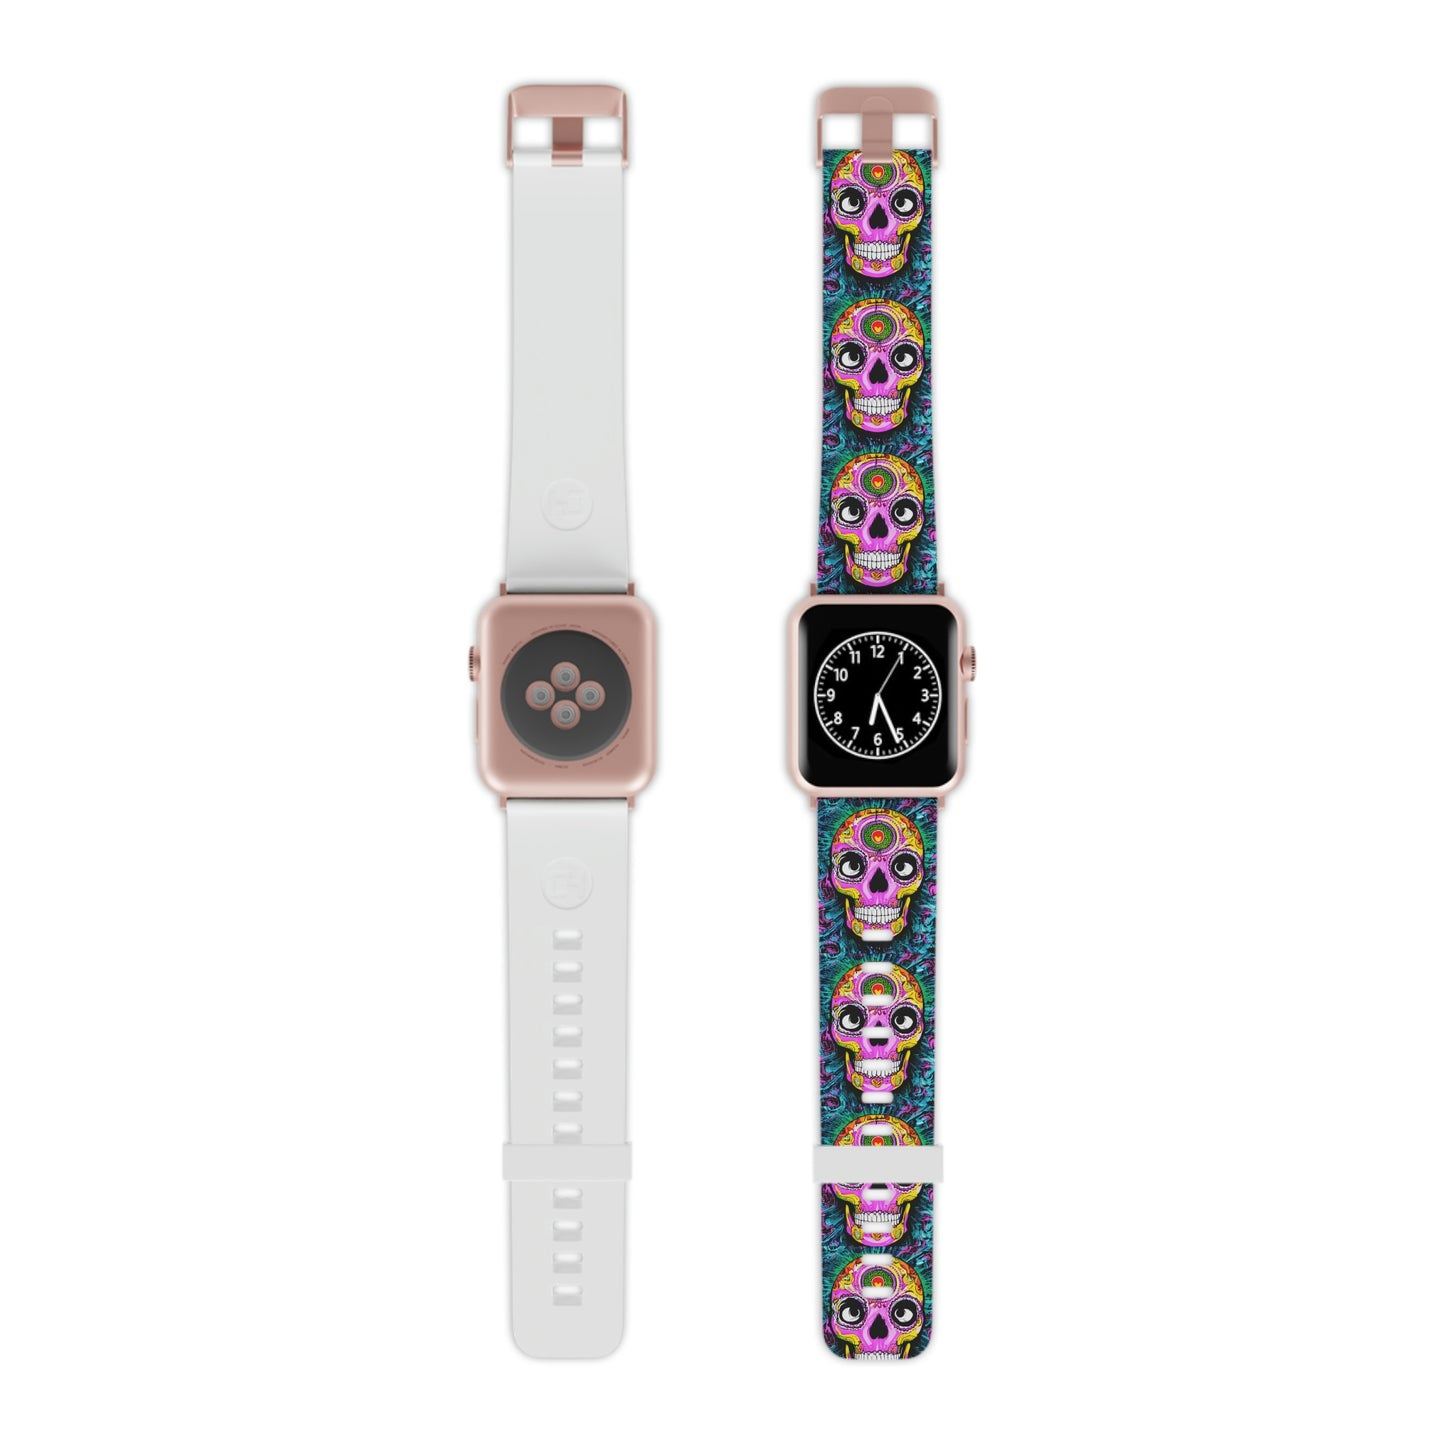 Trippy psychedelic Skull Skeleton Head Face Watch Band for Apple Watch